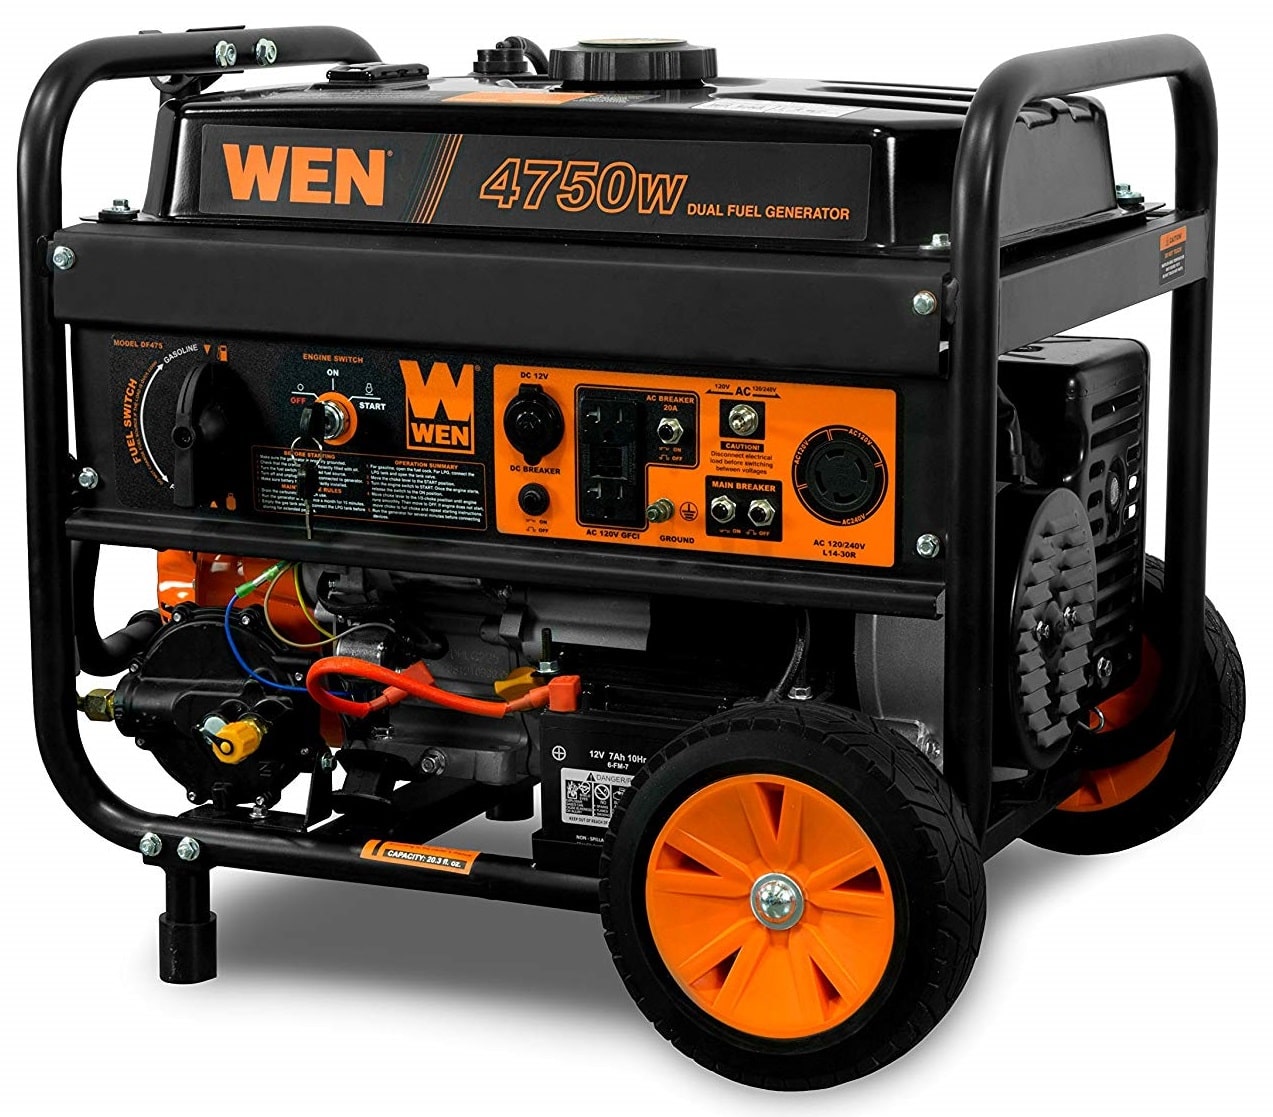 Best Dual Fuel Generators of 2021 - Reviews and Buying Guide